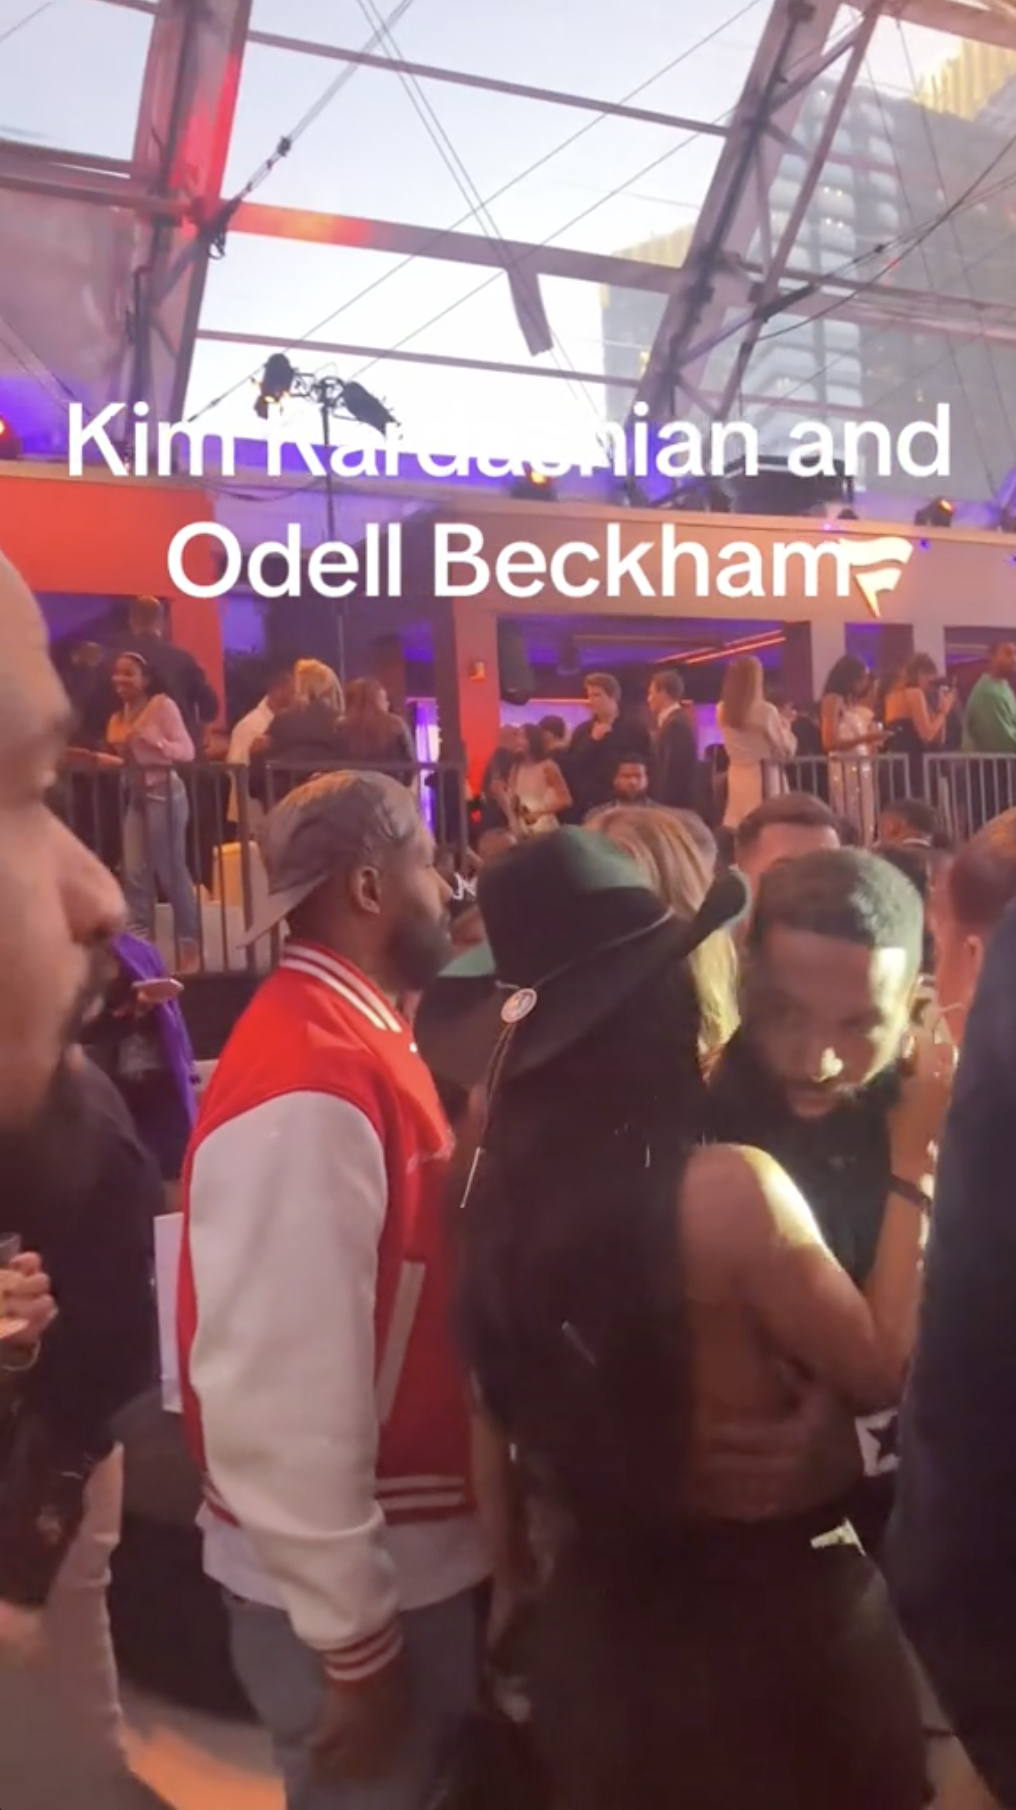 Kim (seen here with Odell Beckham Jr.) is not ready for love, said psychic matchmaker Deborah Graham